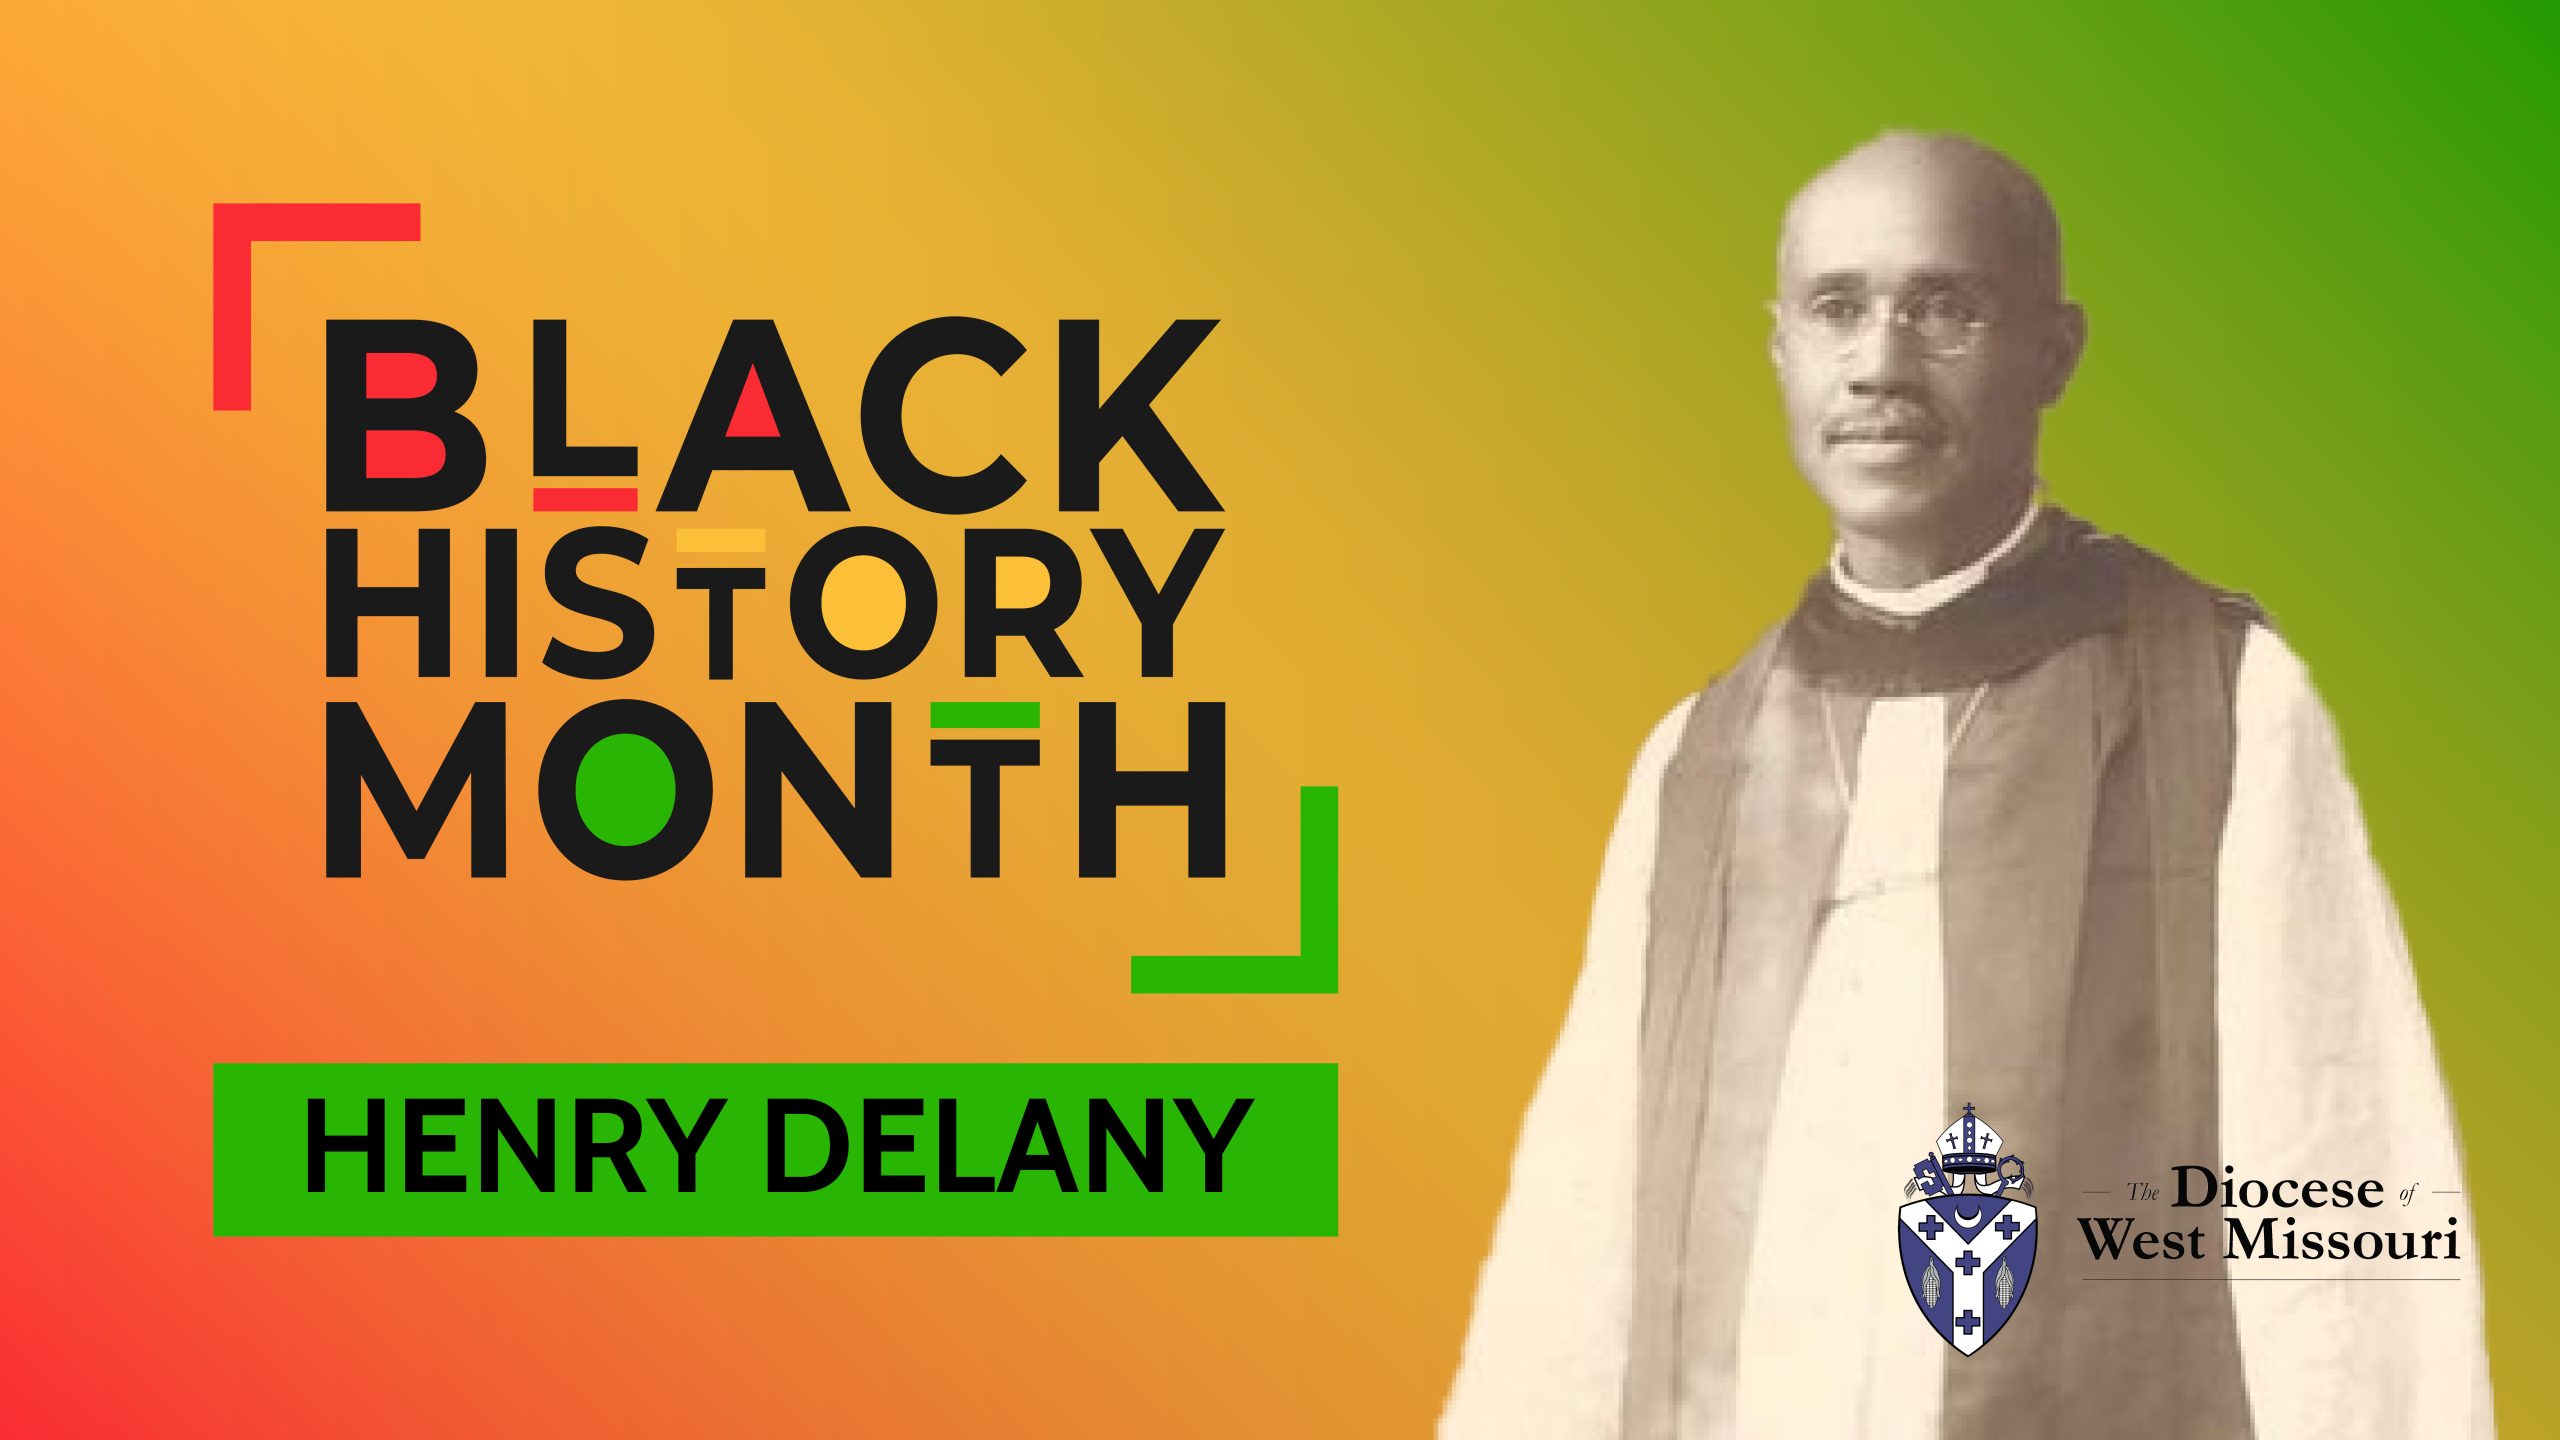 Black History Month: The Life of Henry Delany